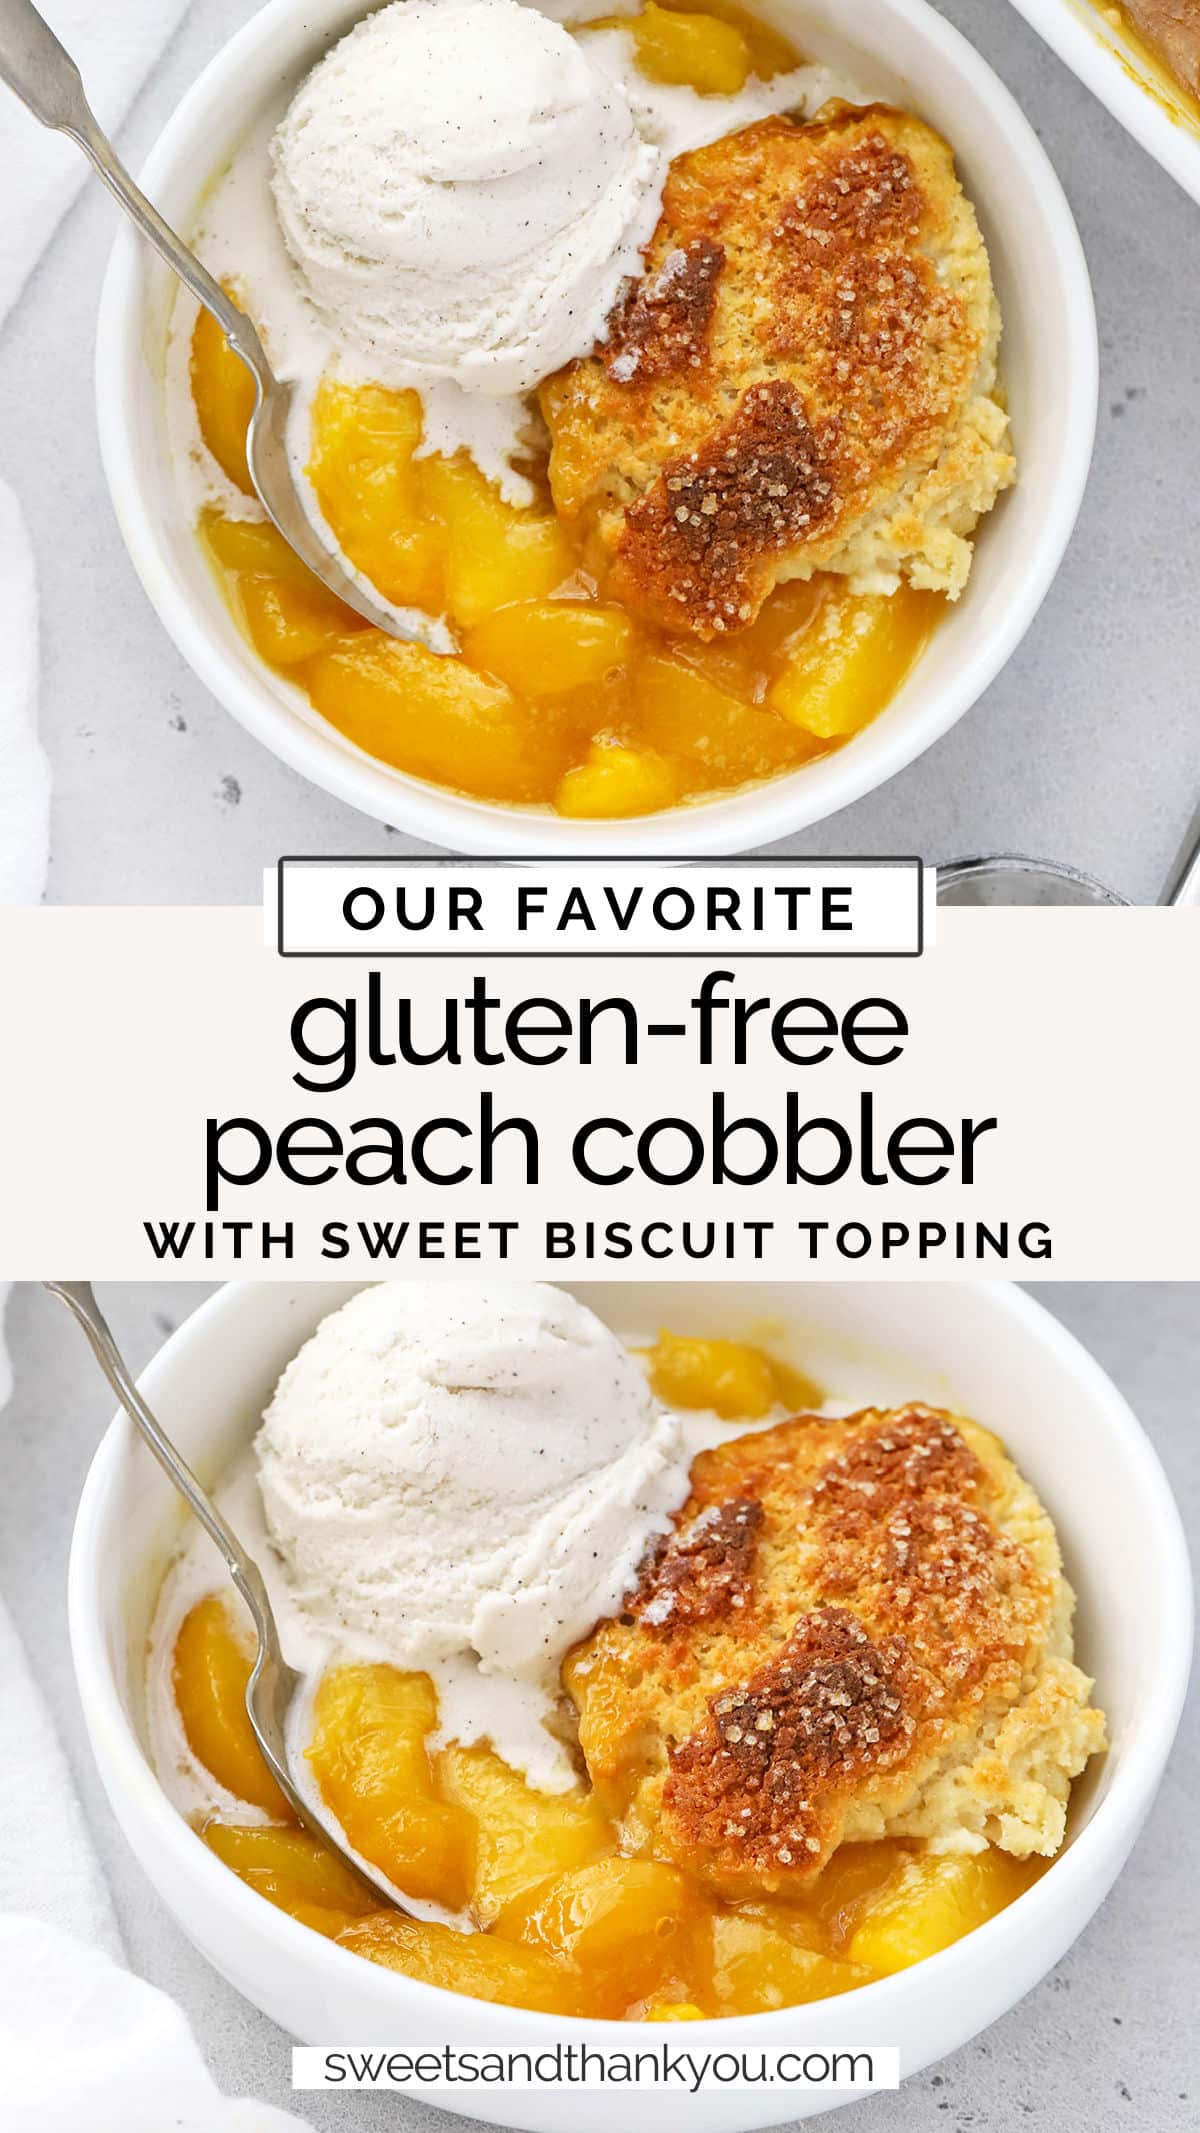 Gluten-Free Peach Cobbler - Gorgeous peach filling with a sweet biscuit cobbler topping. We love this easy gluten-free peach cobbler recipe! // gluten free peach cobbler with biscuit topping // northern style peach cobbler // gluten-free biscuit peach cobbler // gluten-free peach cobbler filling // gluten-free peach cobbler topping // easy gluten-free peach cobbler // gluten-free peach dessert // gluten-free summer dessert // peach cobbler with ice cream // gluten free summer peach cobbler